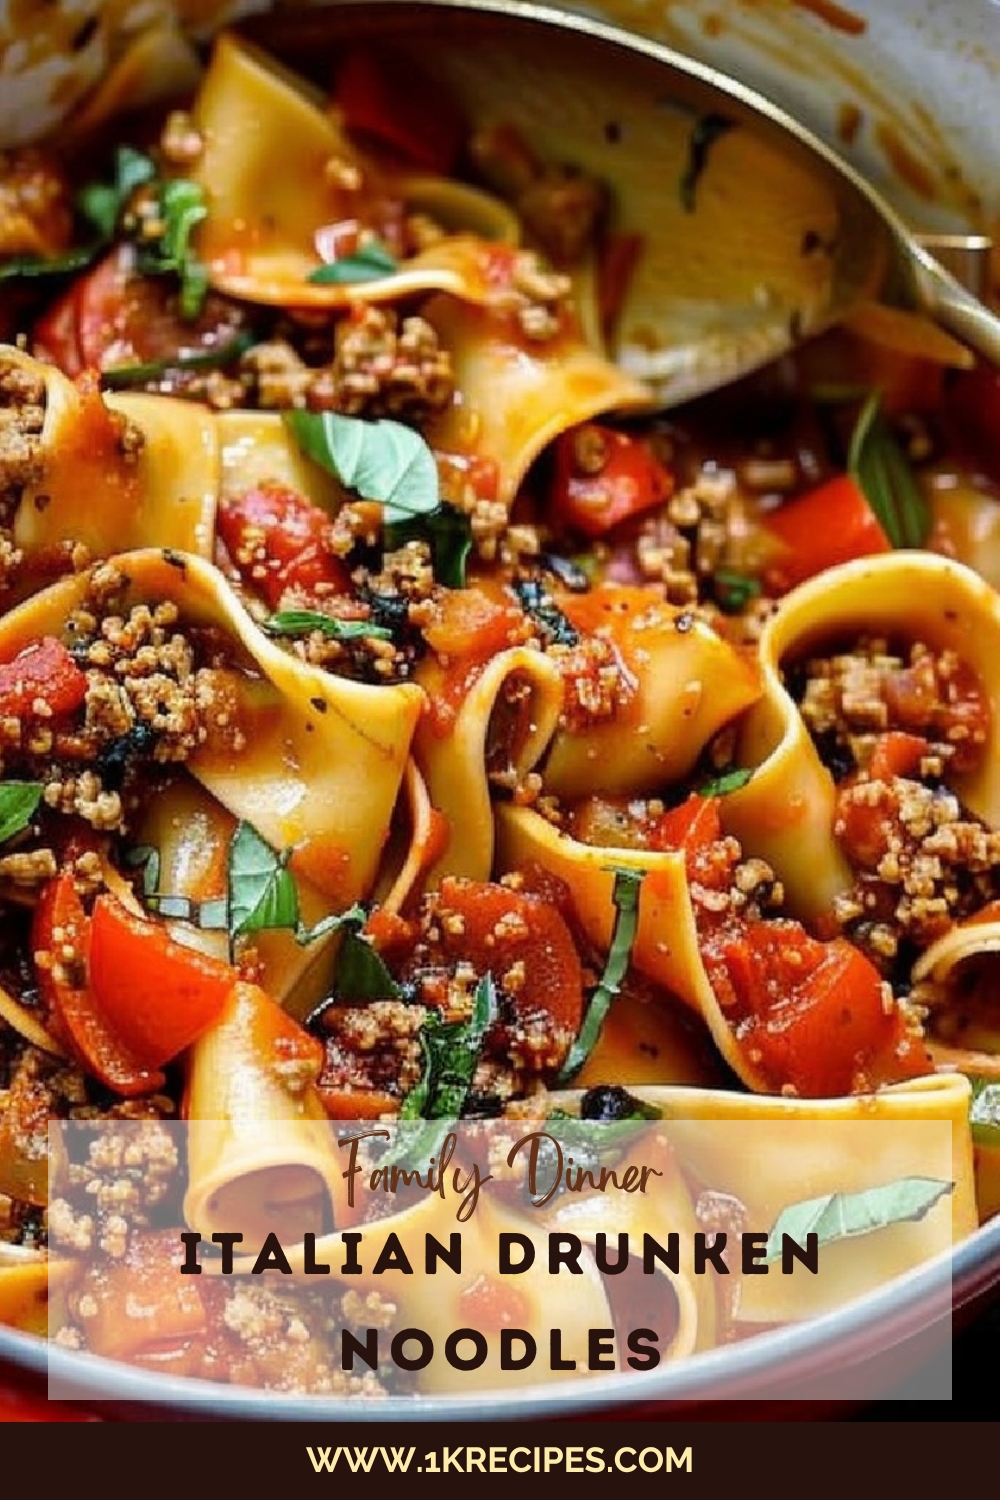 Transform your weeknight dinners with our quick and delicious Italian Drunken Noodles recipe!